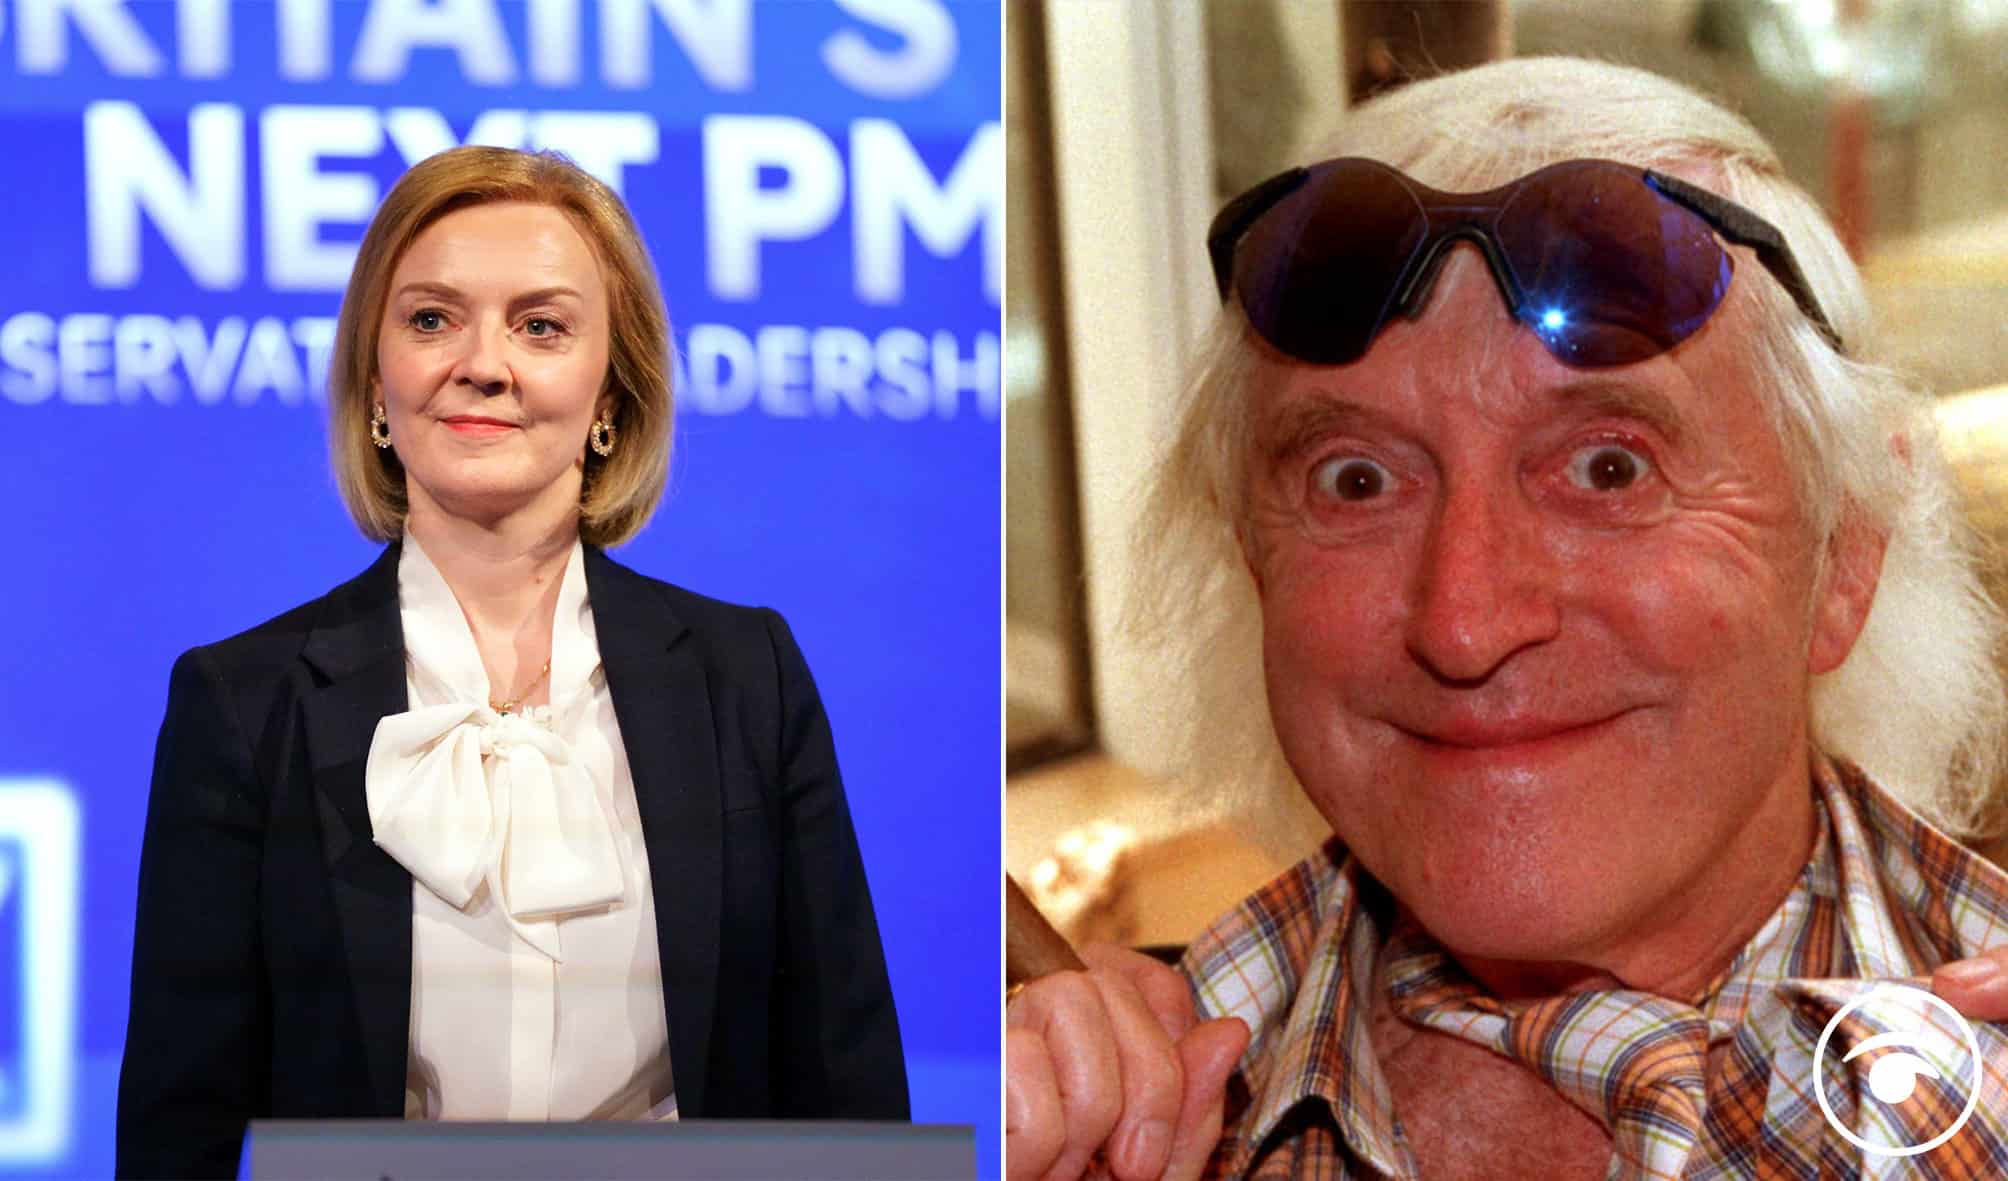 What do Thatcher and Truss have in common? A fondness for Jimmy Savile for one